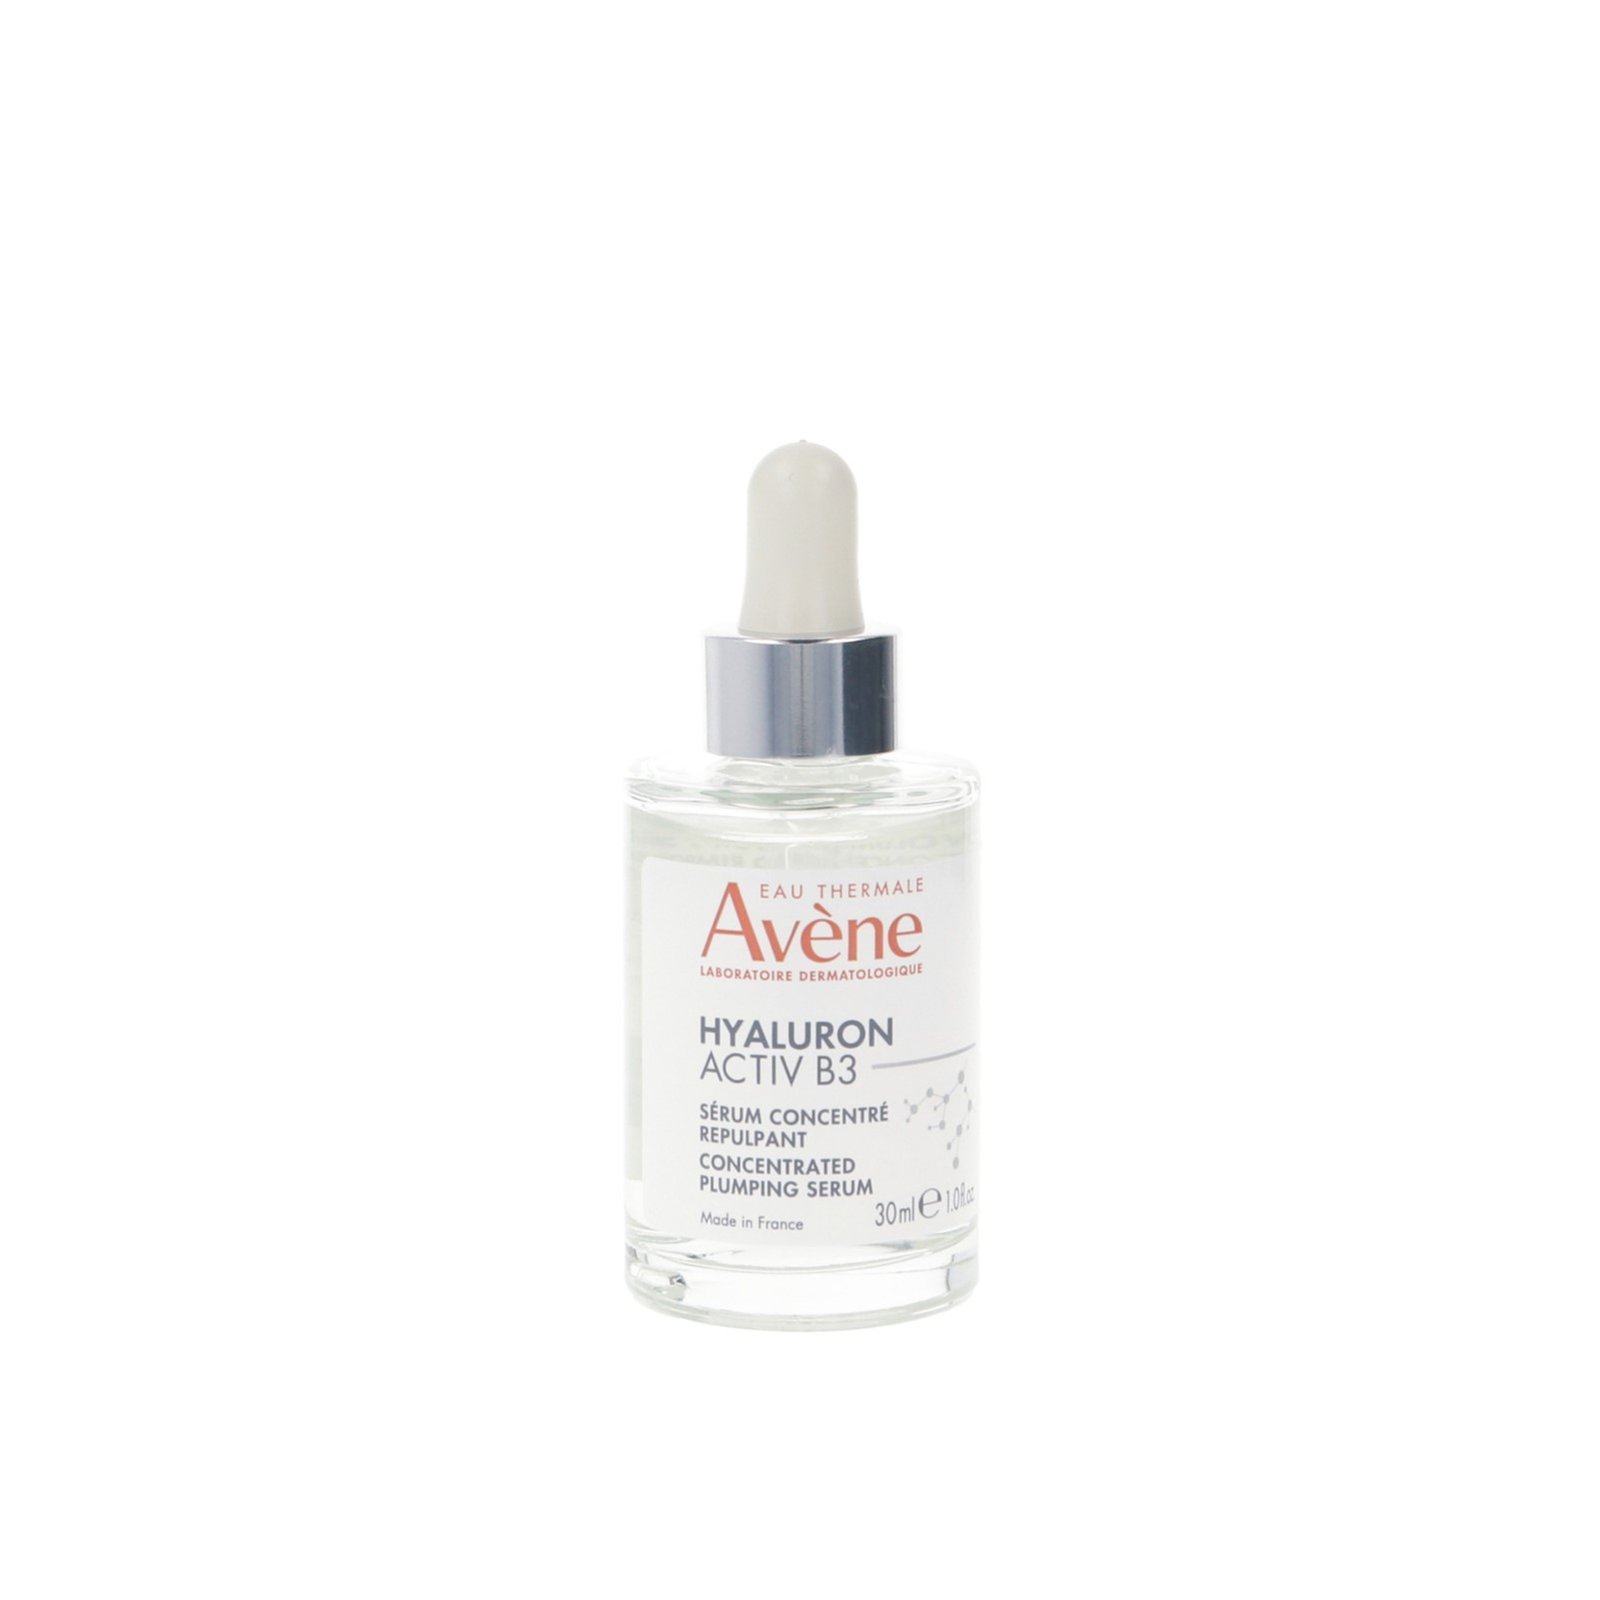 Hyaluron Activ B3 Concentrated Plumping Serum, 30 ml – Avène : Serums